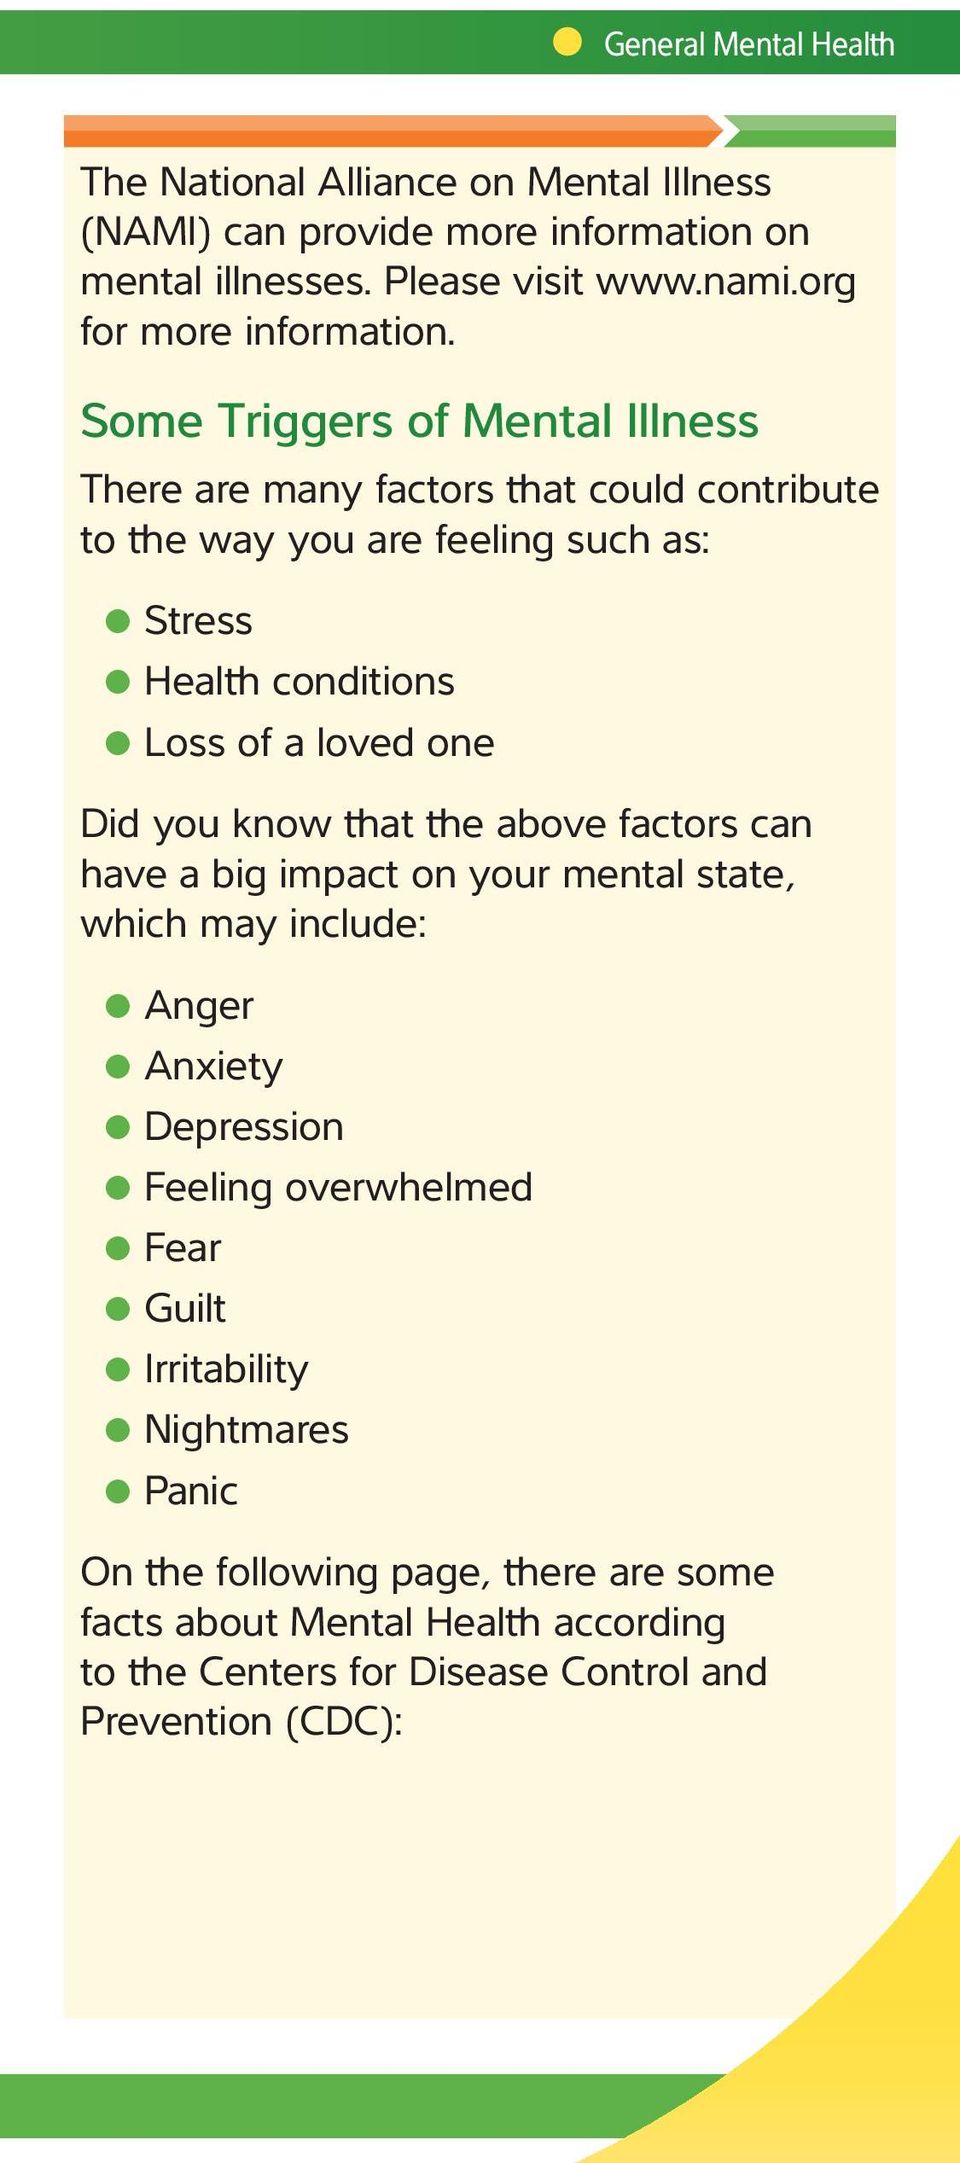 Some Triggers of Mental Illness There are many factors that could contribute to the way you are feeling such as: Stress Health conditions Loss of a loved one